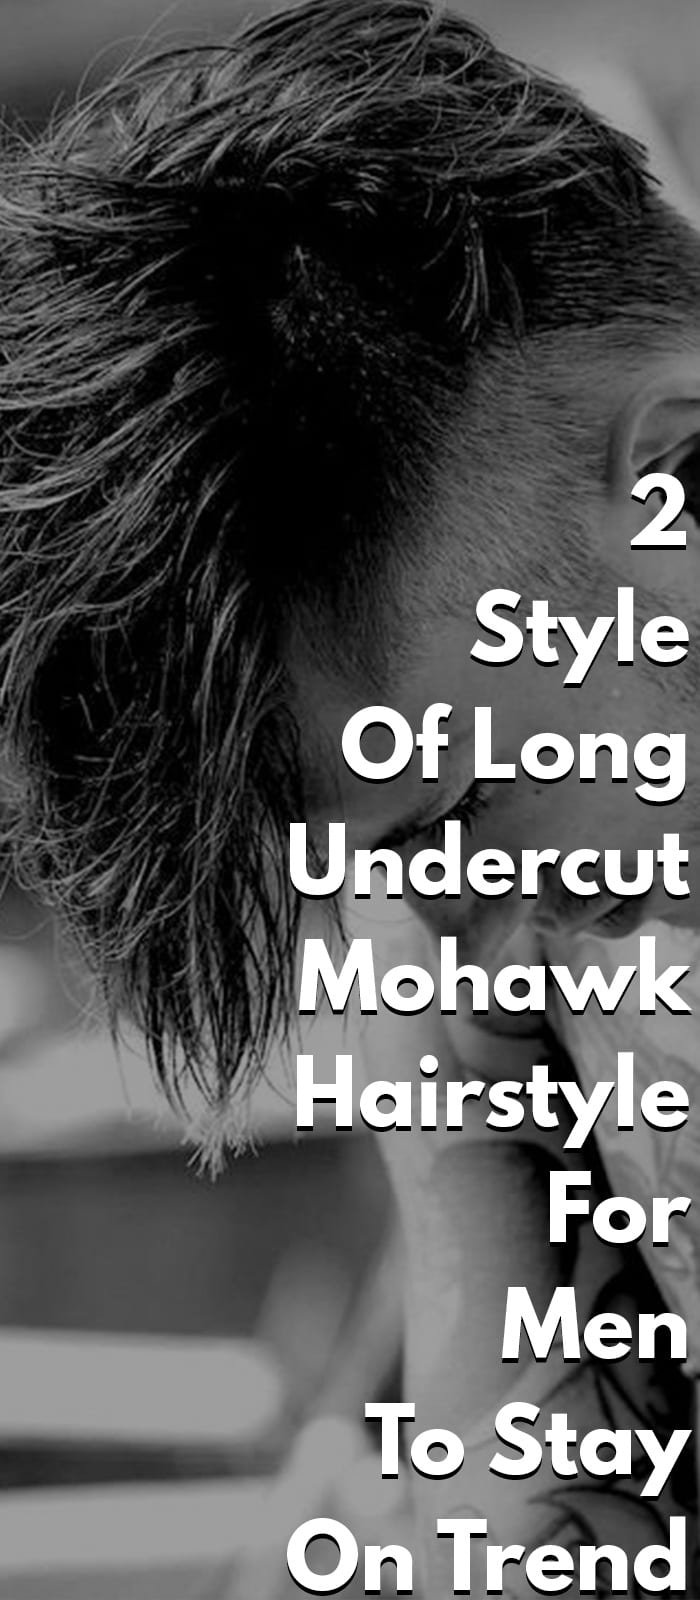 2 Style Of Long Undercut Mohawk Hairstyle For Men To Stay On Trend